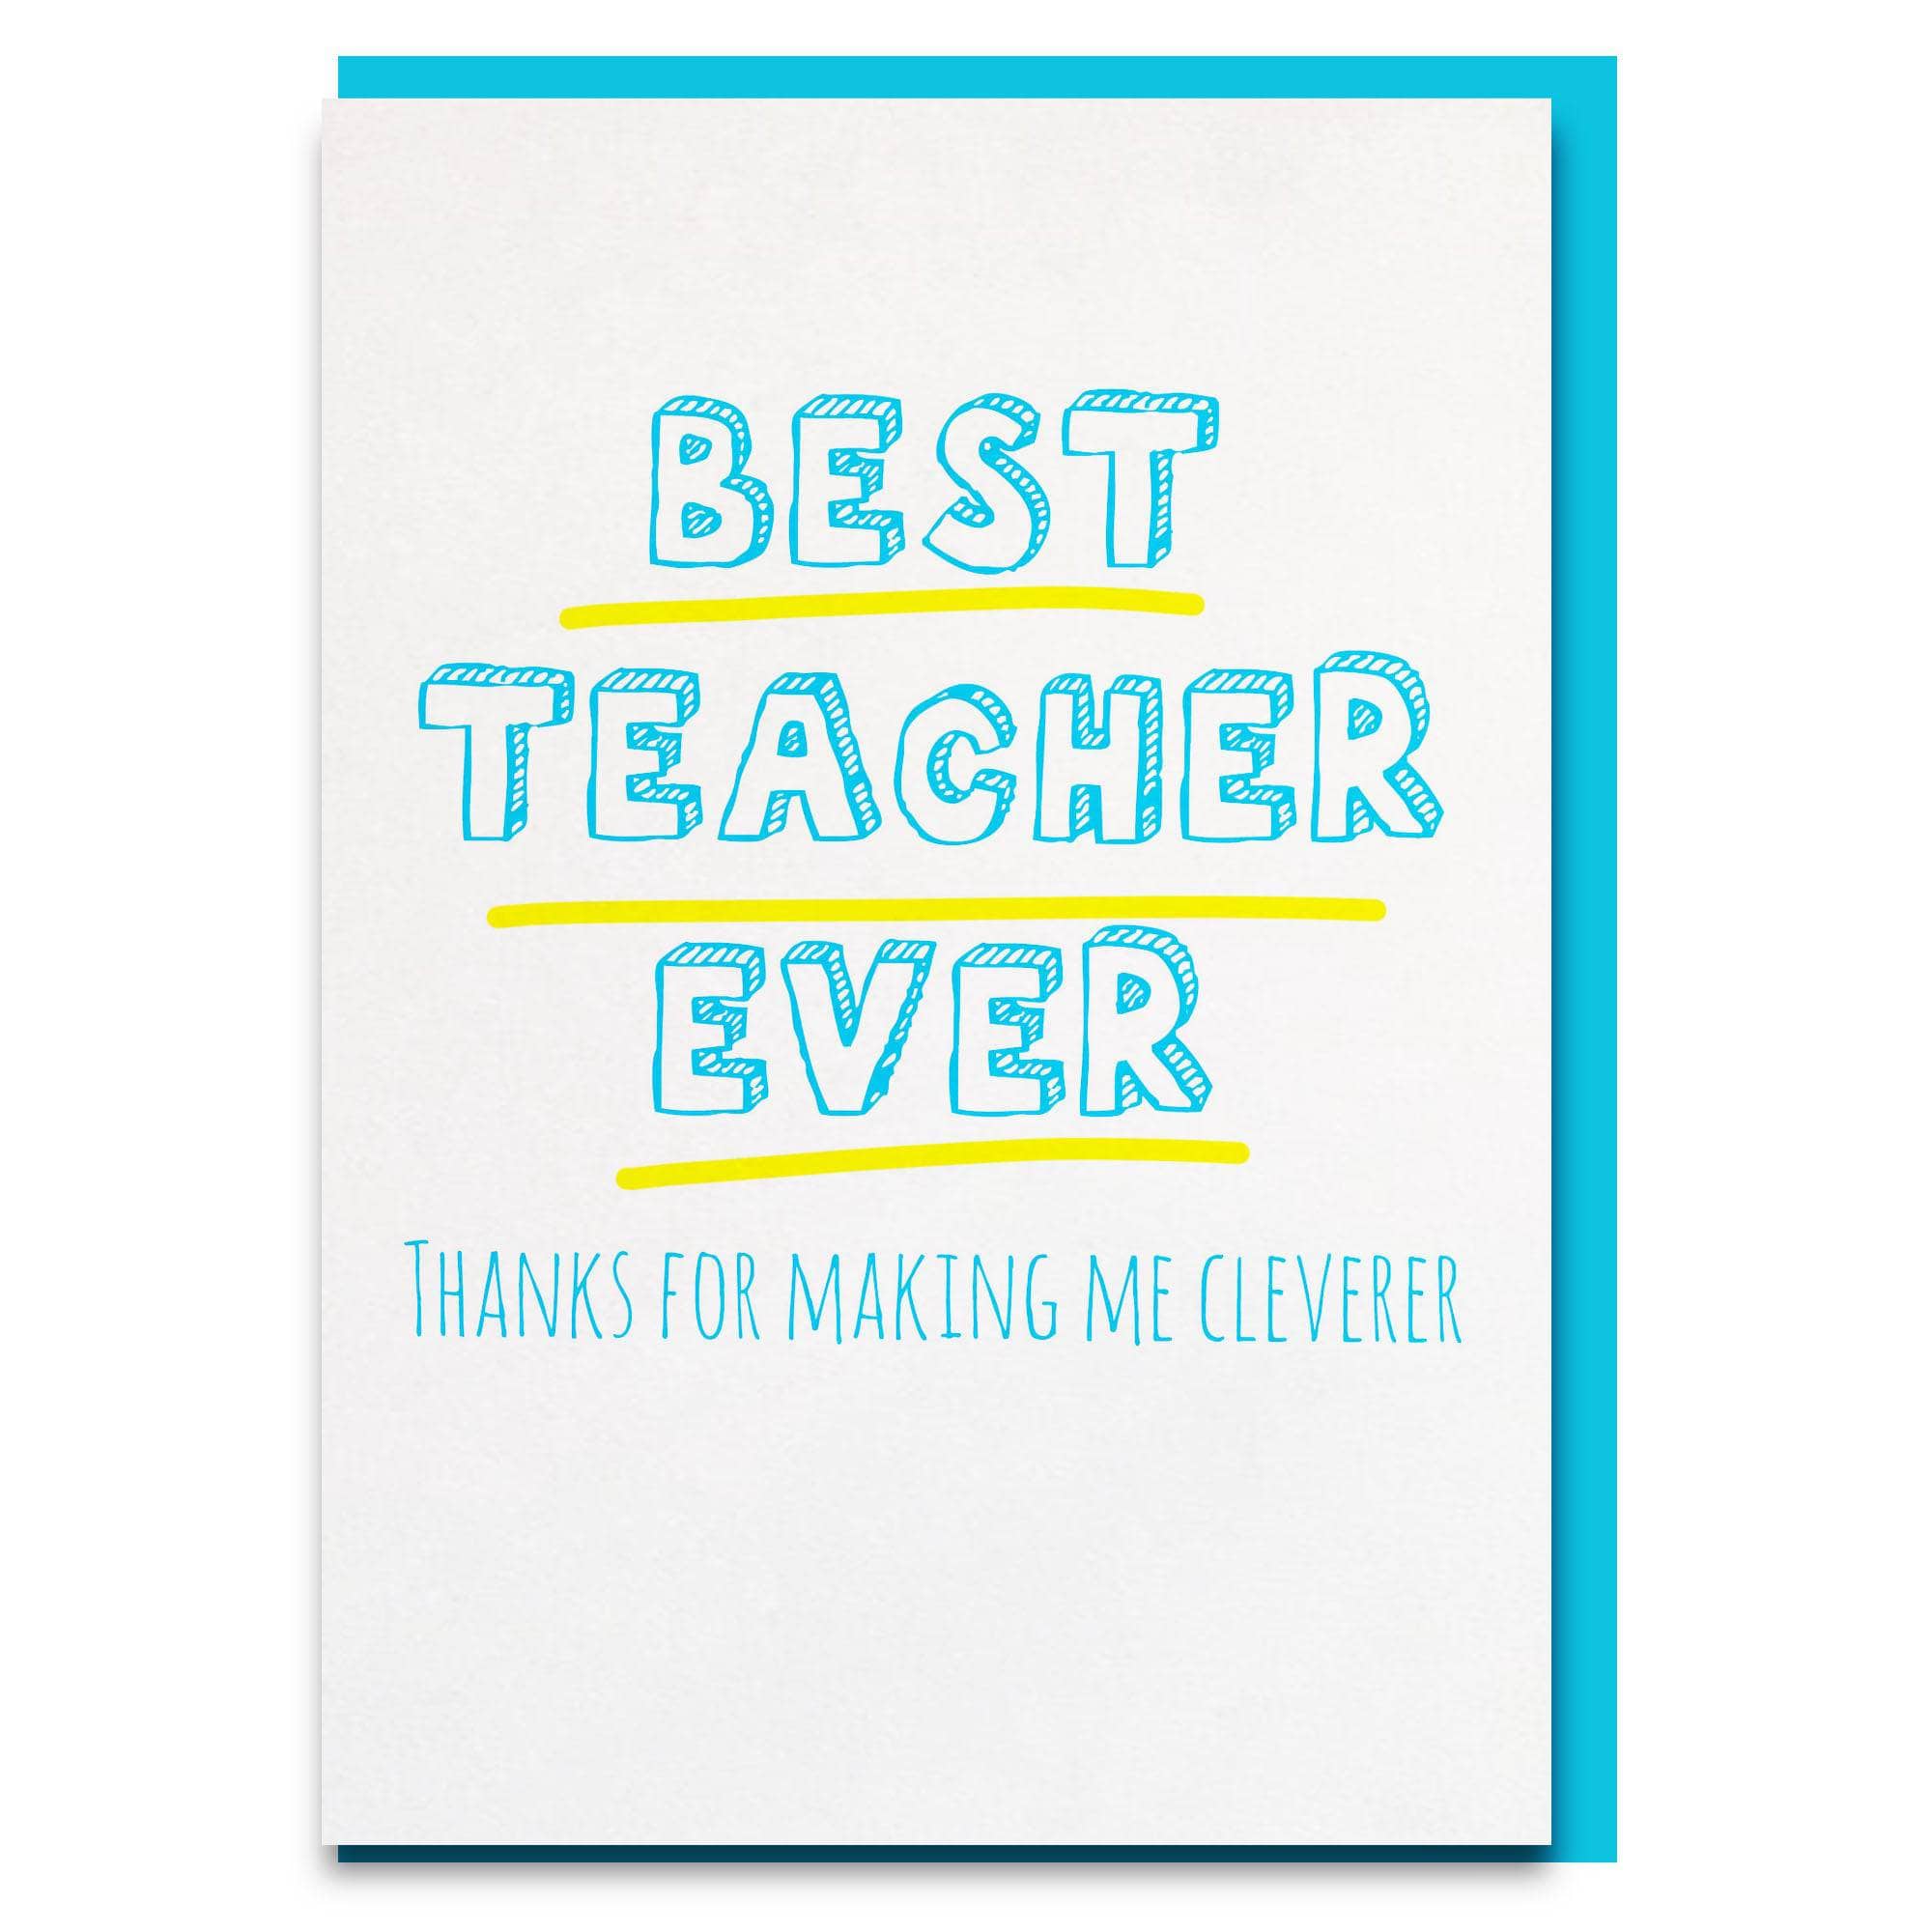 Funny and cheeky "thanks for making me cleverer" thank you card for teacher.